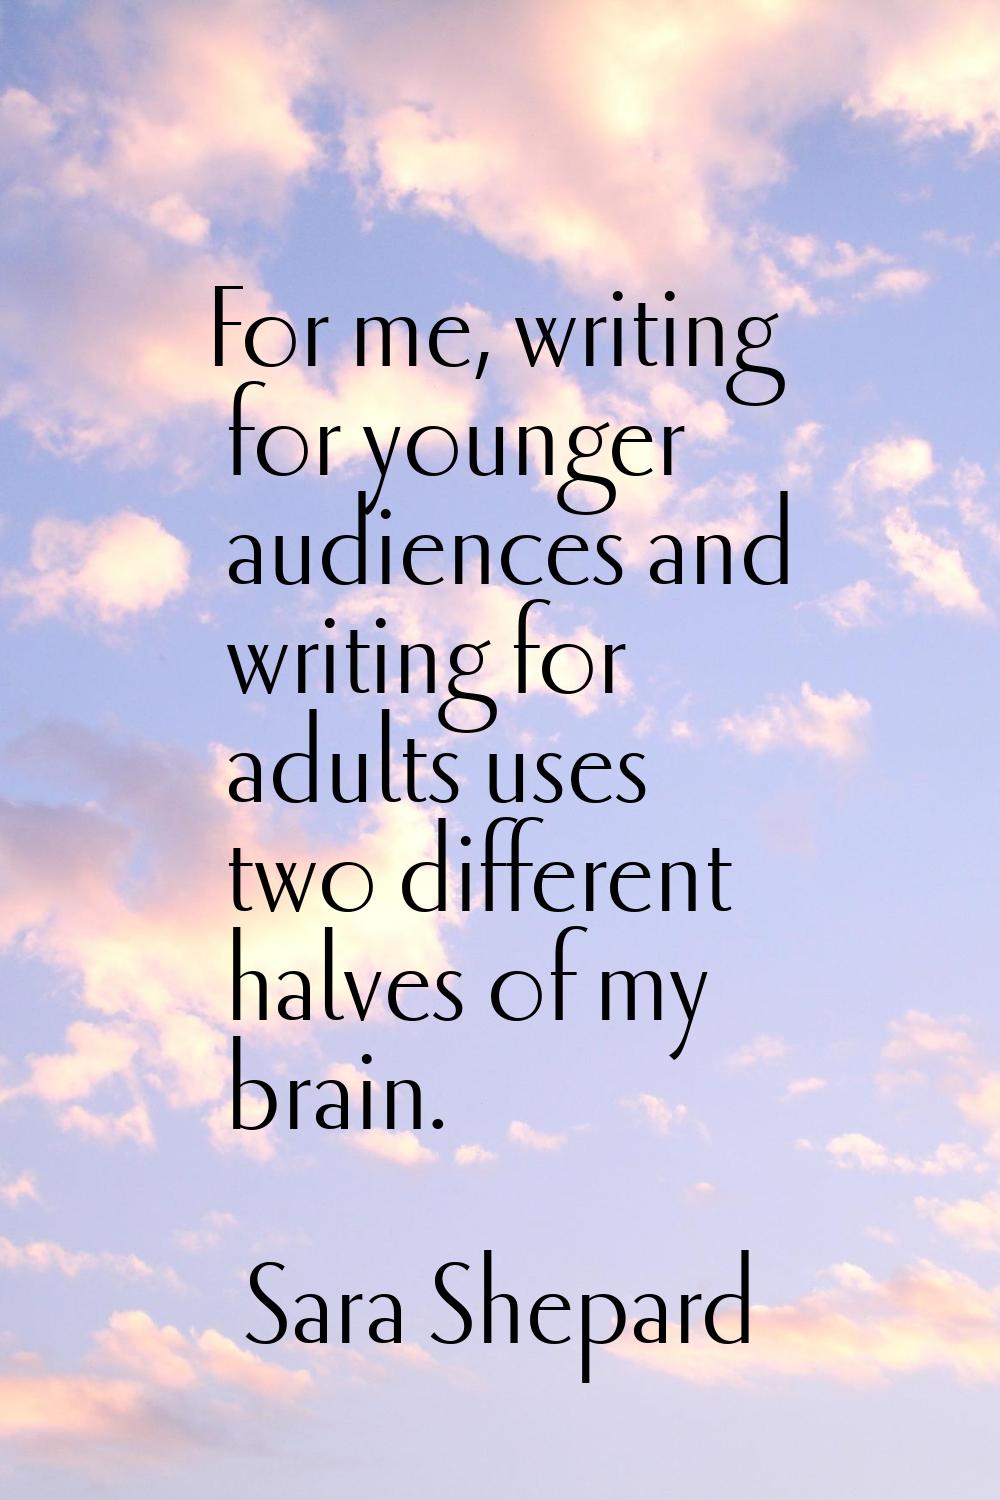 For me, writing for younger audiences and writing for adults uses two different halves of my brain.